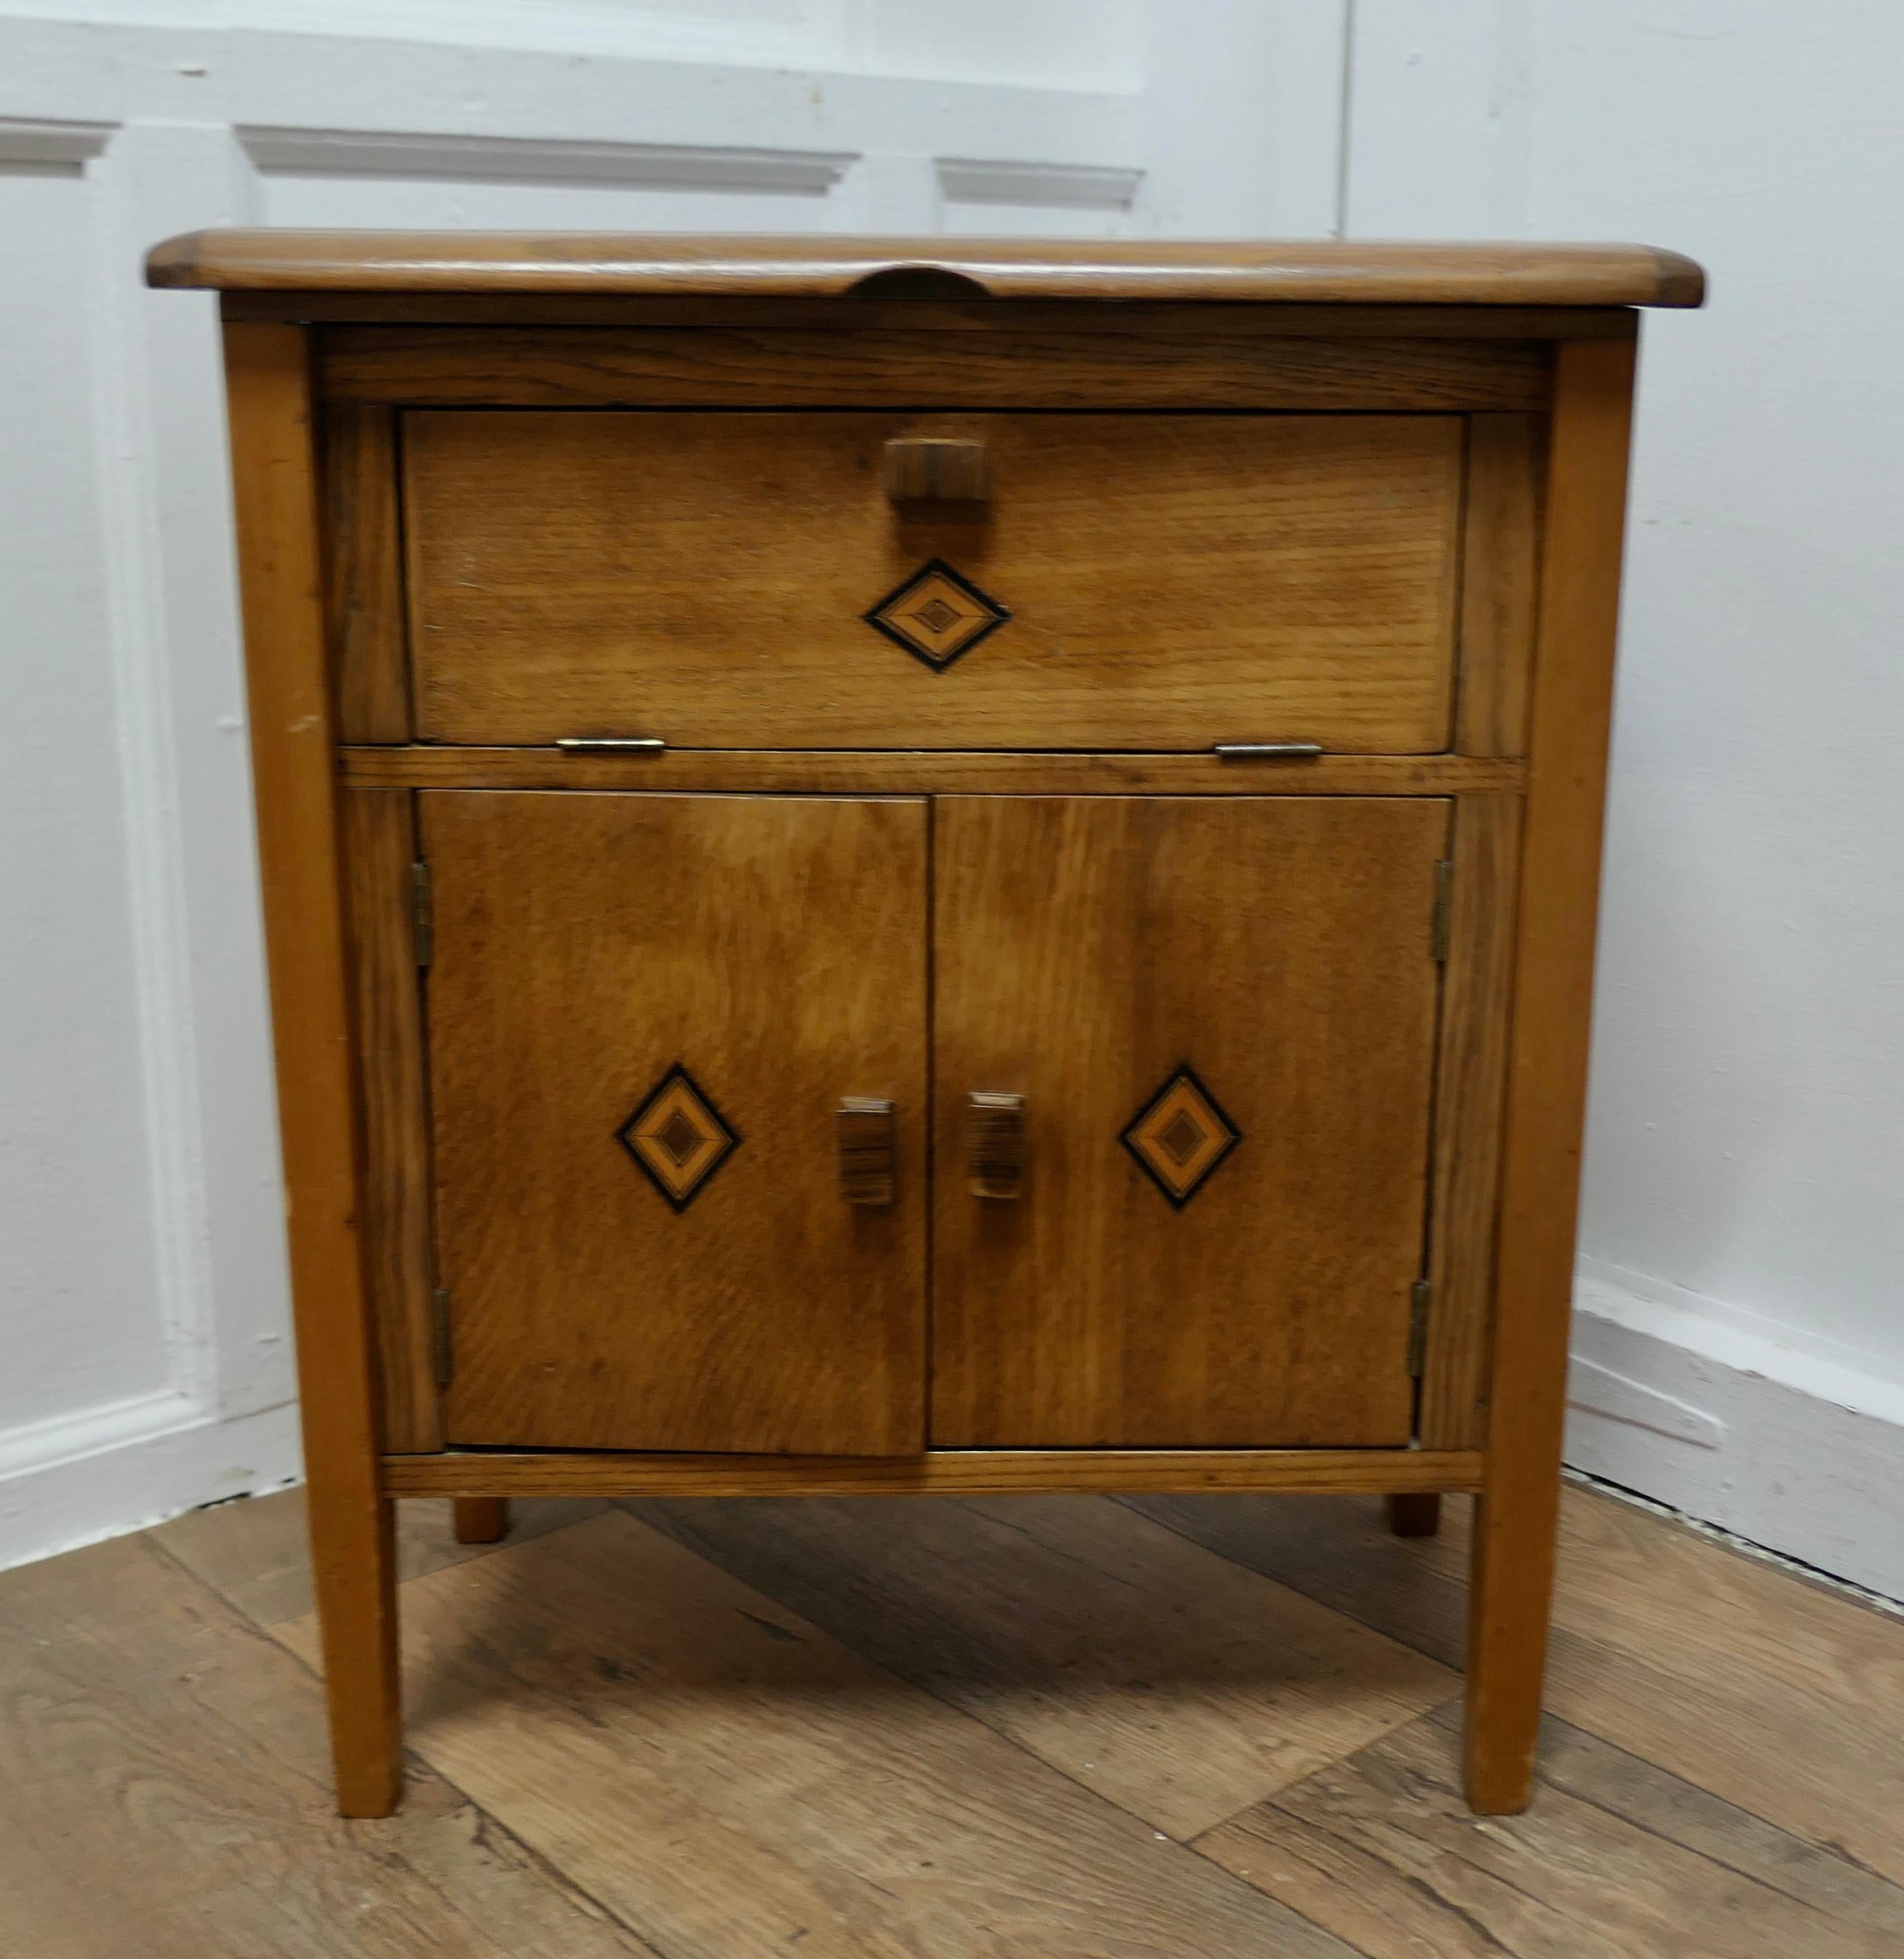 Walnut Sewing Cabinet

This is a good and useful little cupboard which has doors to the front, above this there is a cotton reel fall front compartment and the top lifts up to access the rest of the storage
The top opening storage has a pin cushion